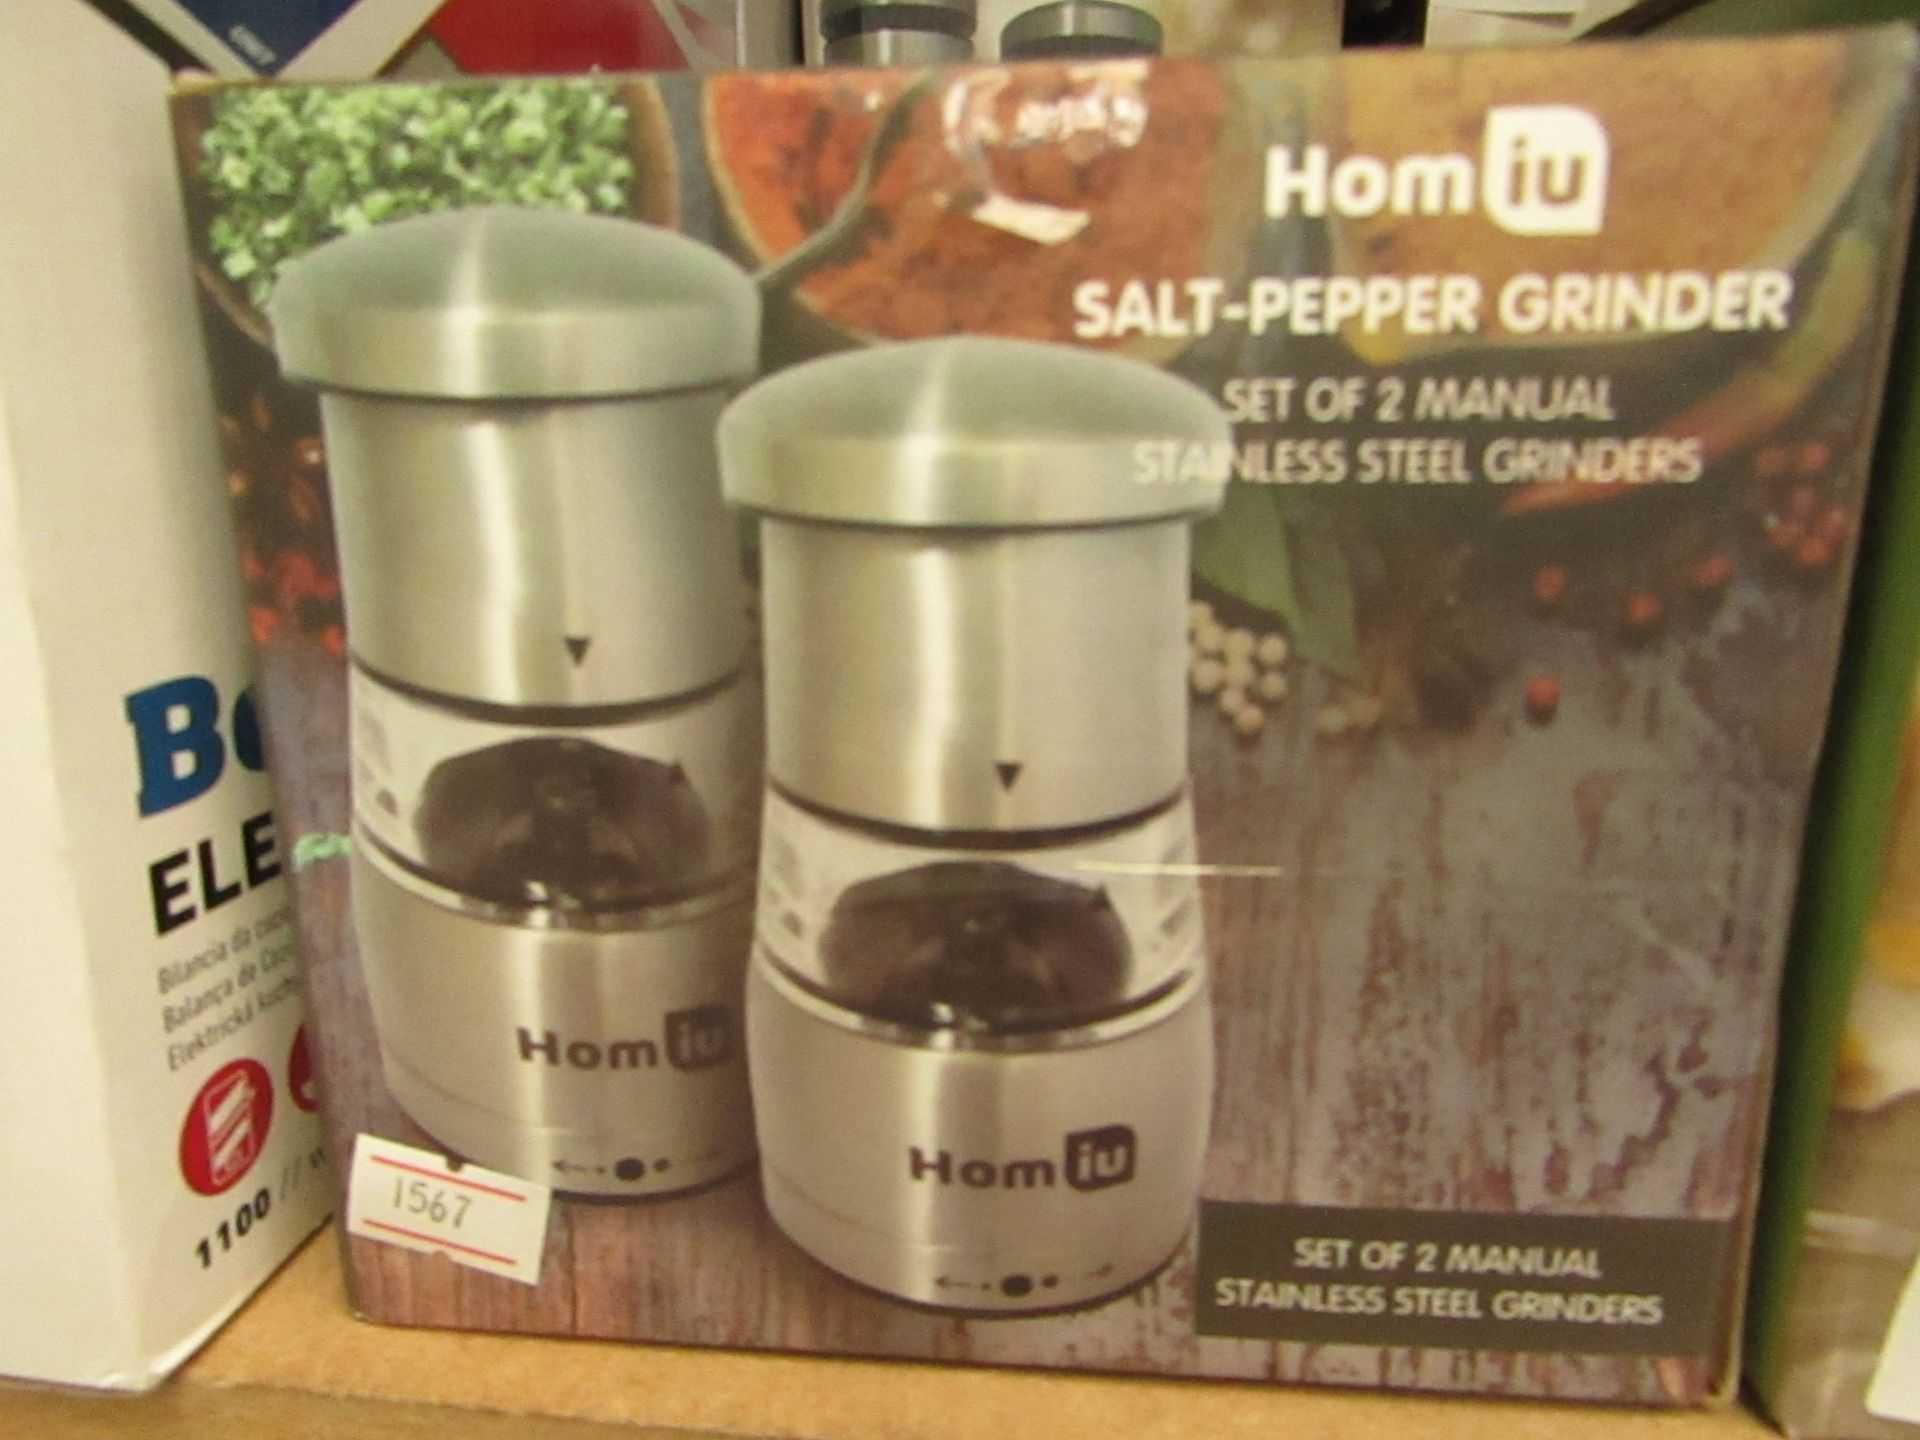 Homiu salt-pepper grinder set of 2 manual stainless steel grinders, unchecked and boxed.